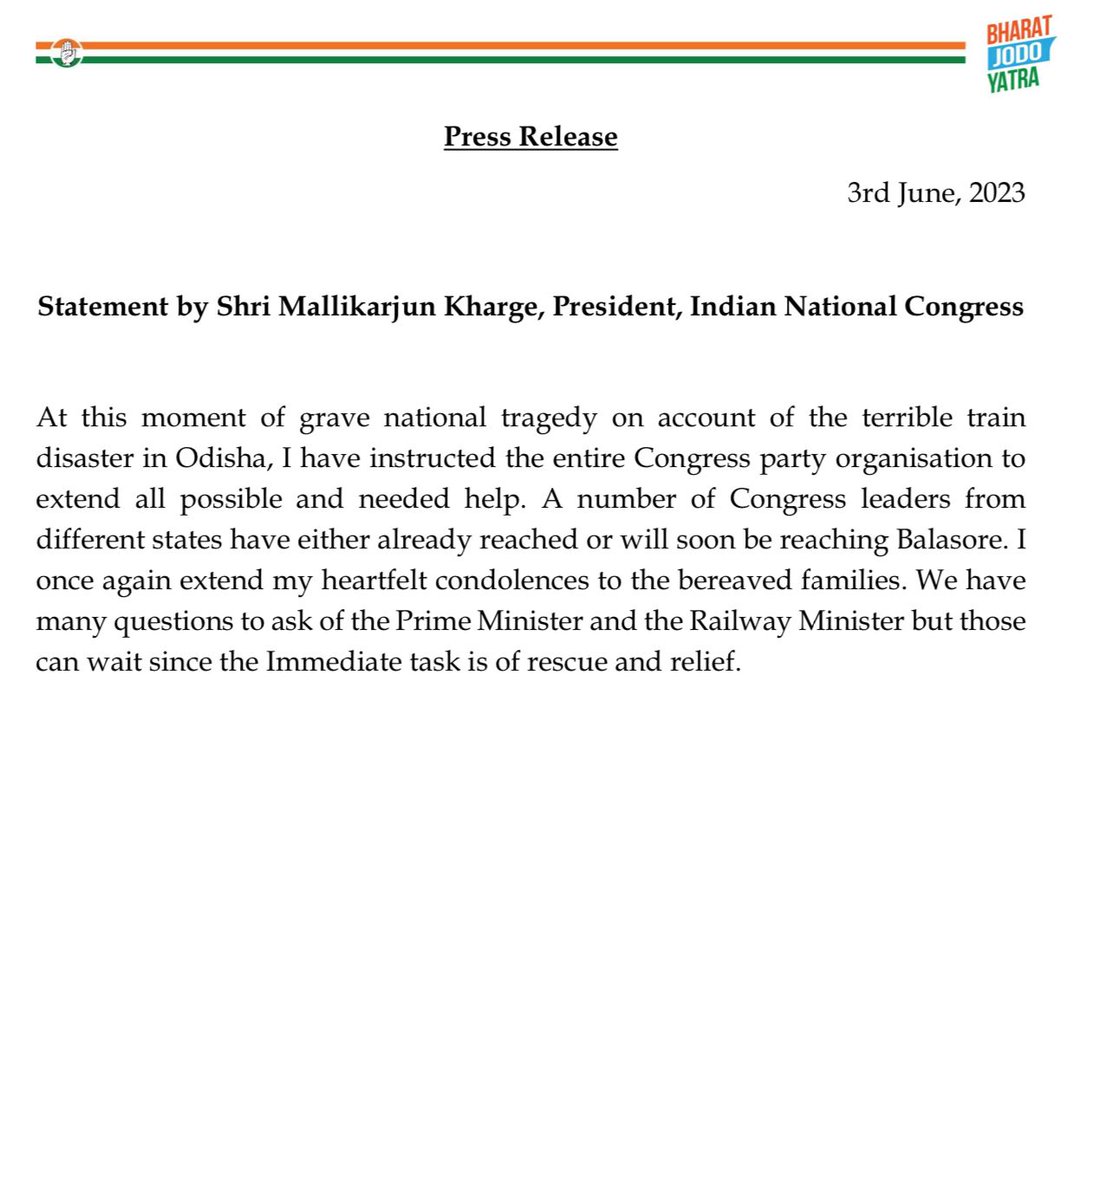 @SevadalMB @AshwiniVaishnaw Congress President Mallikarjun Kharge expresses grief over the Balasore train tragedy in Odisha & instructed the party to be ready for any kind of help.
Over 200 people have died in the mishap.
RIP😭🇮🇳
@kharge @INCIndia @RahulGandhi 
#balasoreaccident #TrainAccident